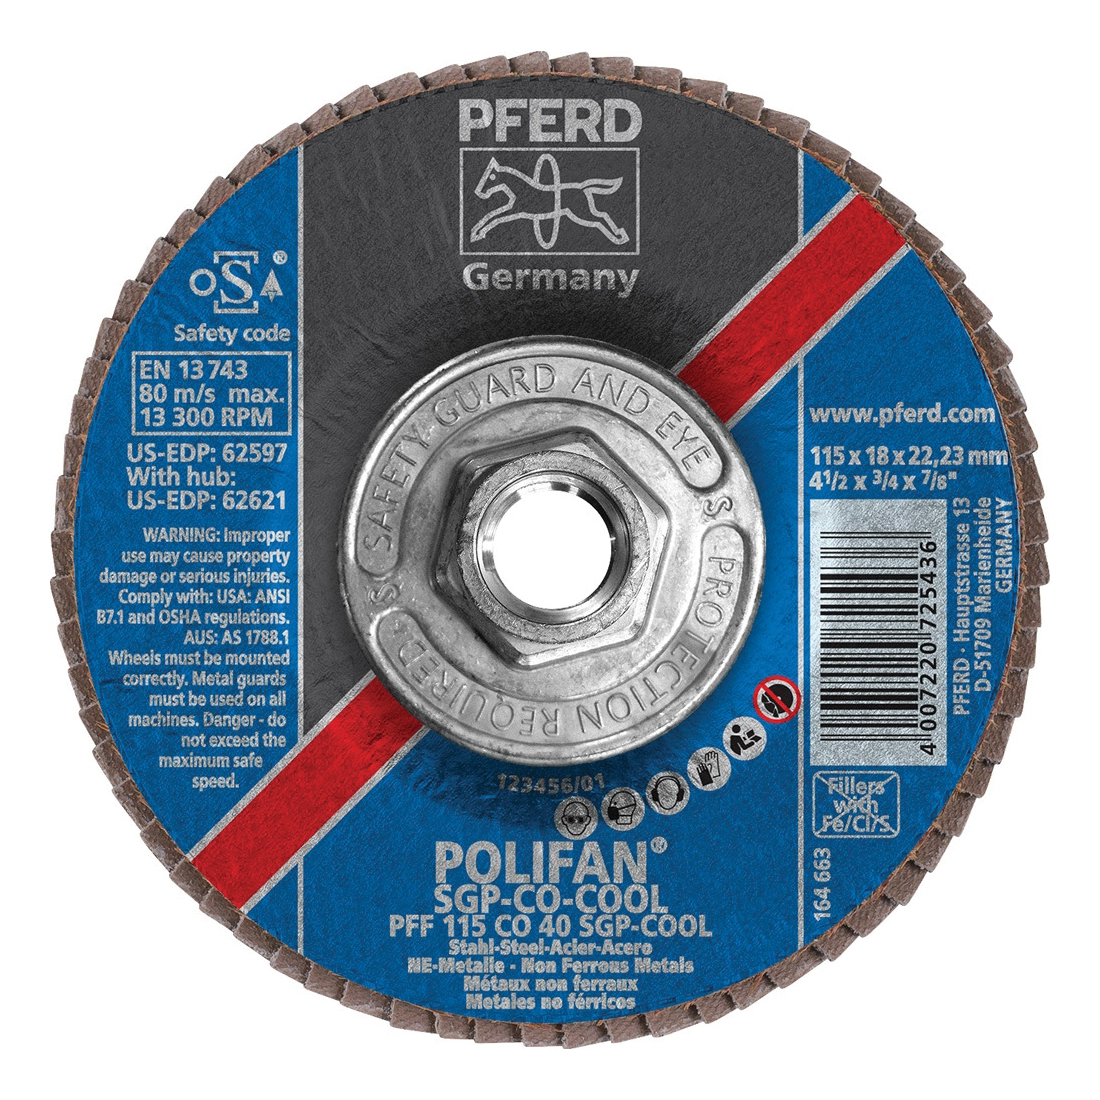 PFERD Polifan® 62621 Special Line SGP CO-COOL Threaded Coated Abrasive Flap Disc, 4-1/2 in Dia, 40 Grit, Ceramic Oxide Abrasive, Type 27 Flat Disc